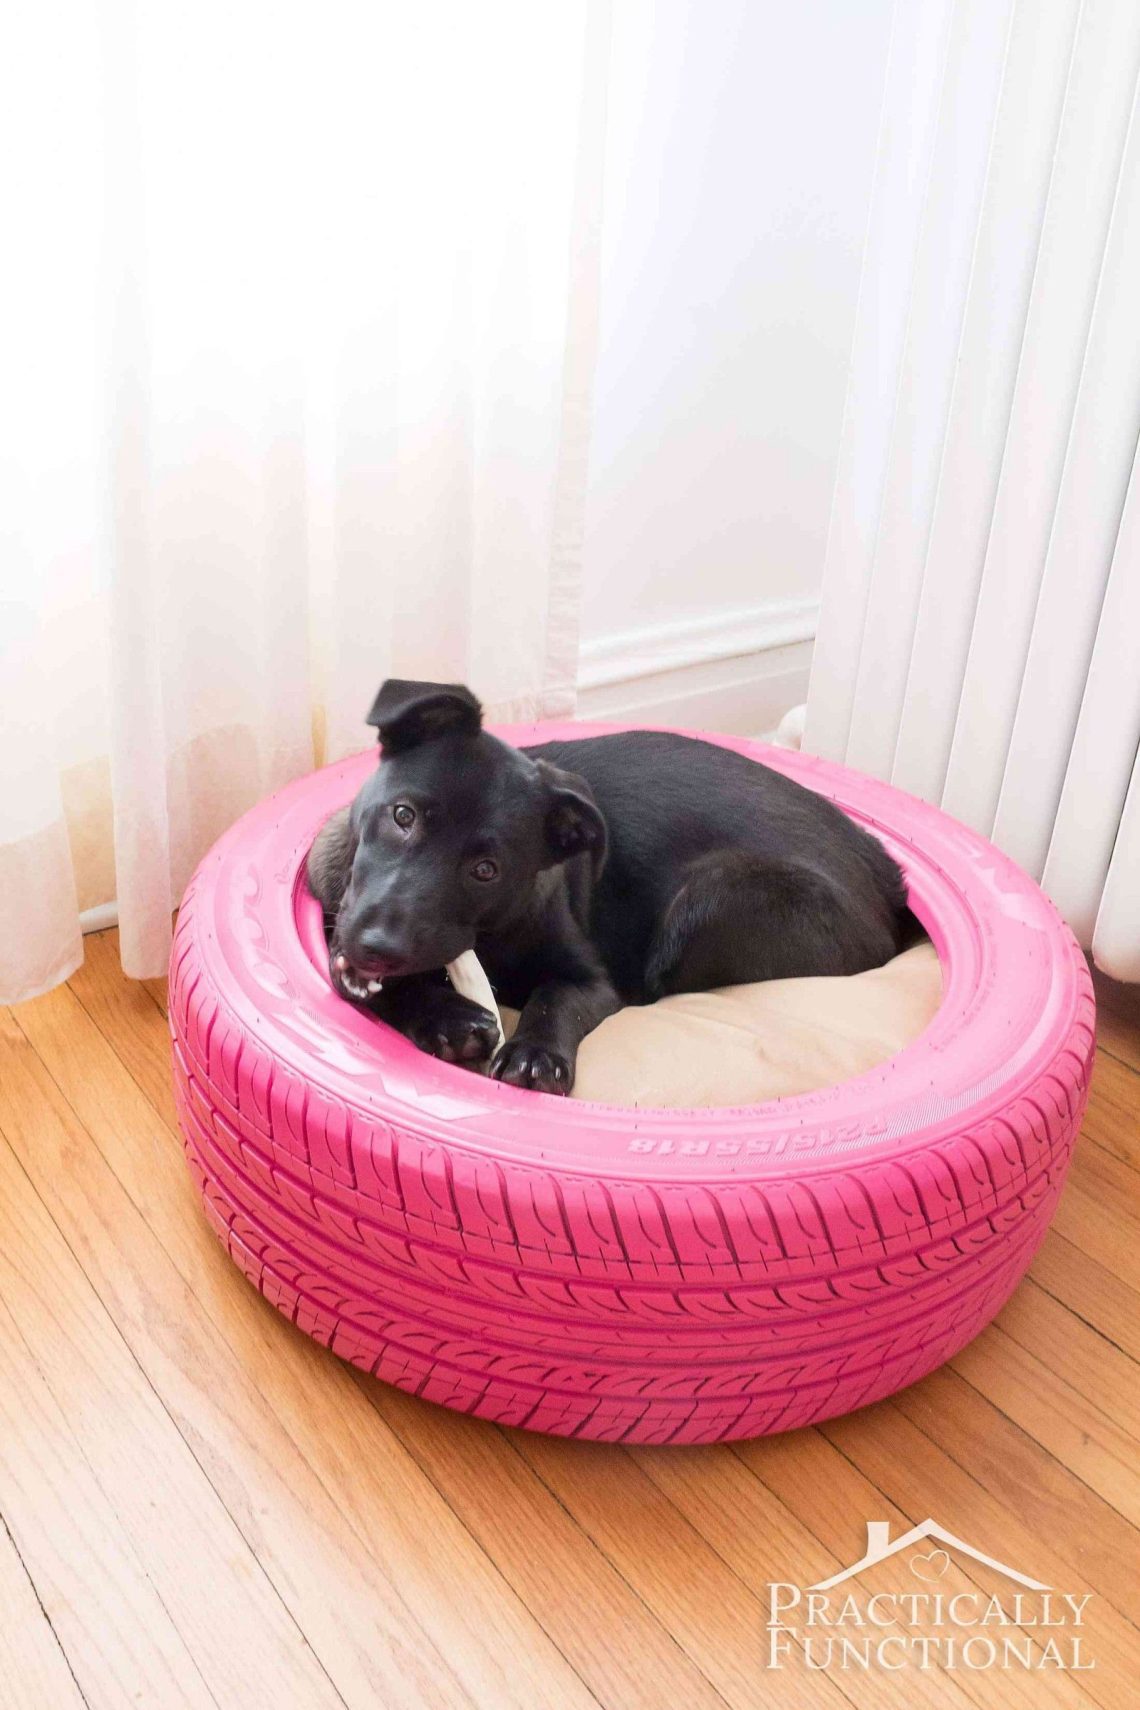 How to make a dog bed?